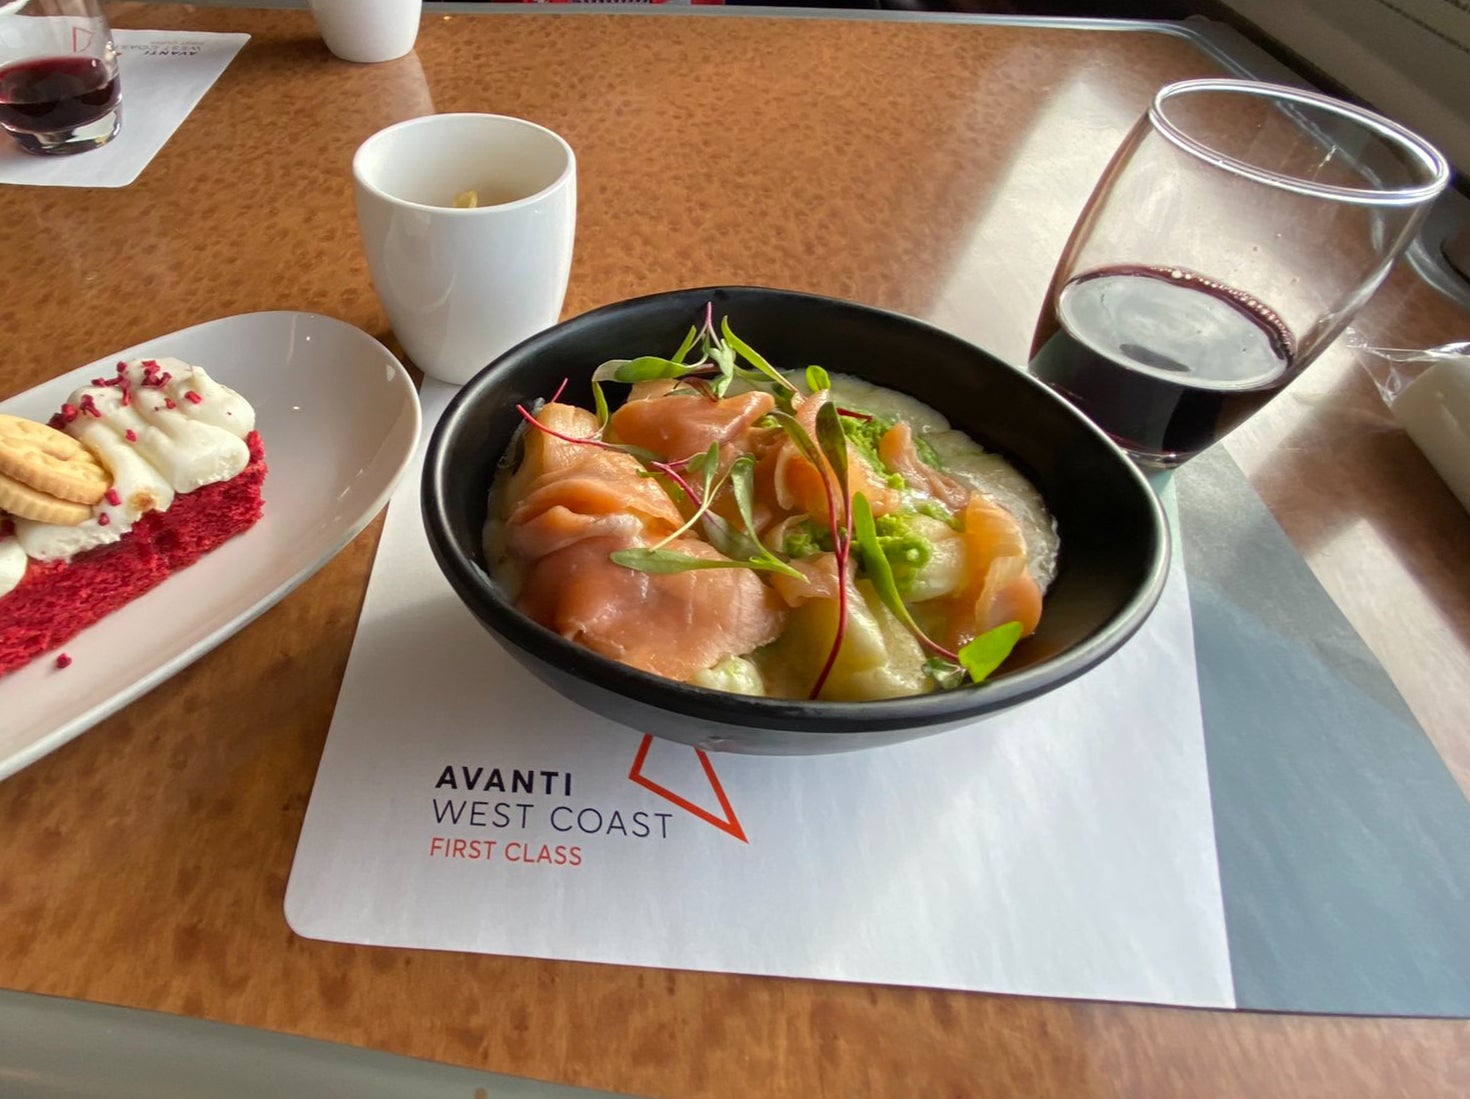 On track: smoked salmon gnocchi and ‘jammy dodger loaf’ served up for lunch on Avanti West Coast